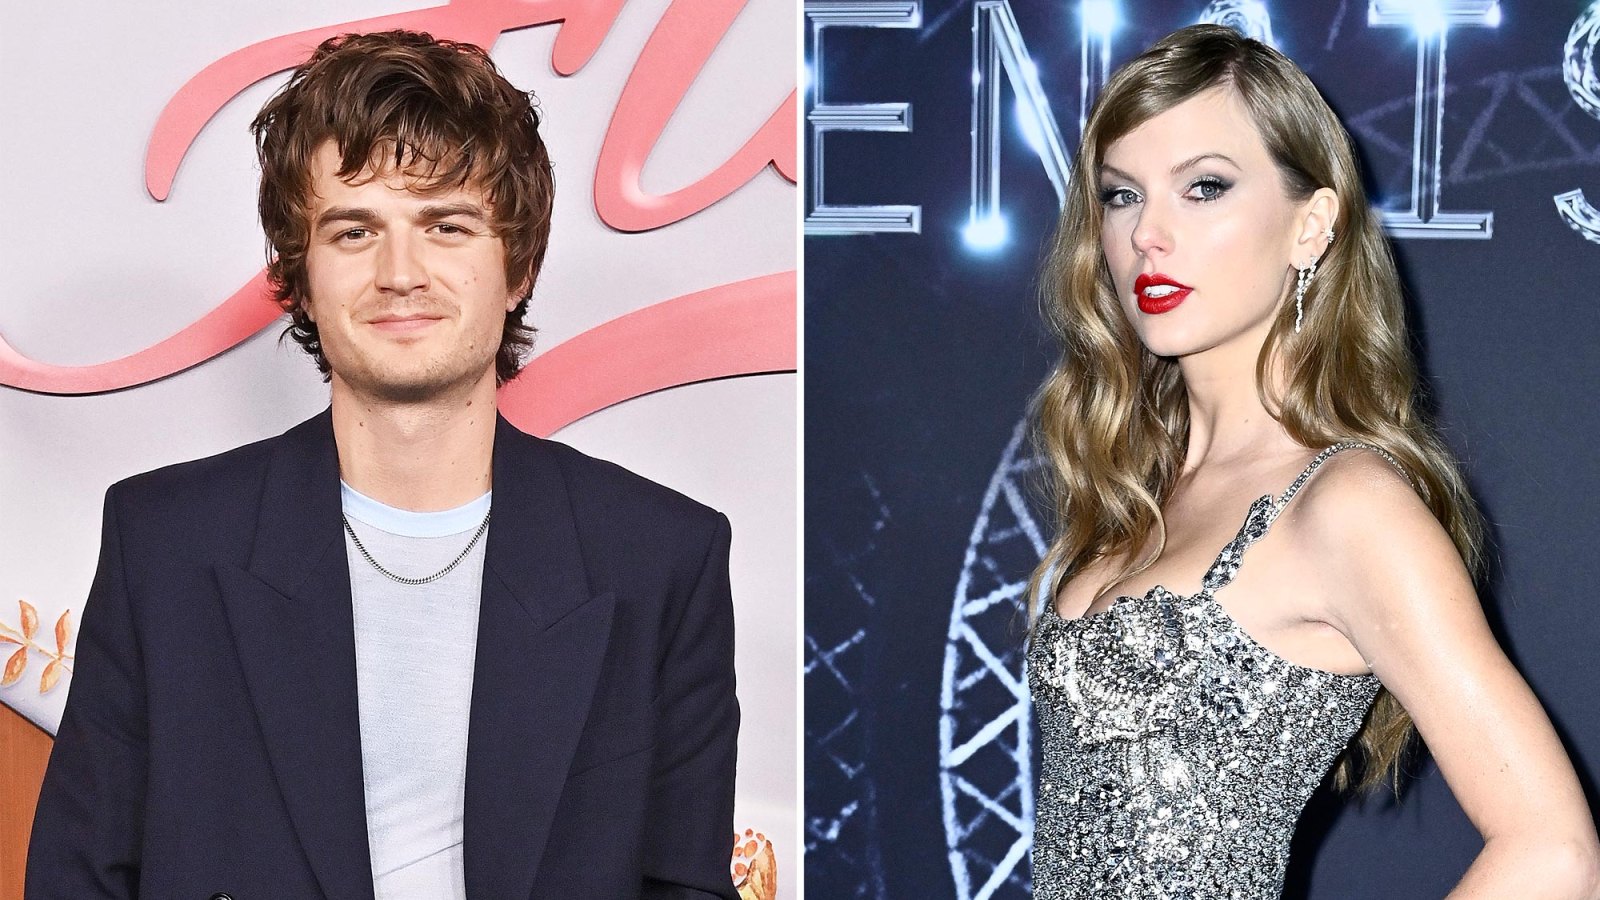 Joe Keery Addresses Fan Rumors About Taylor Swift Collaboration After They Visited Same Music Studio